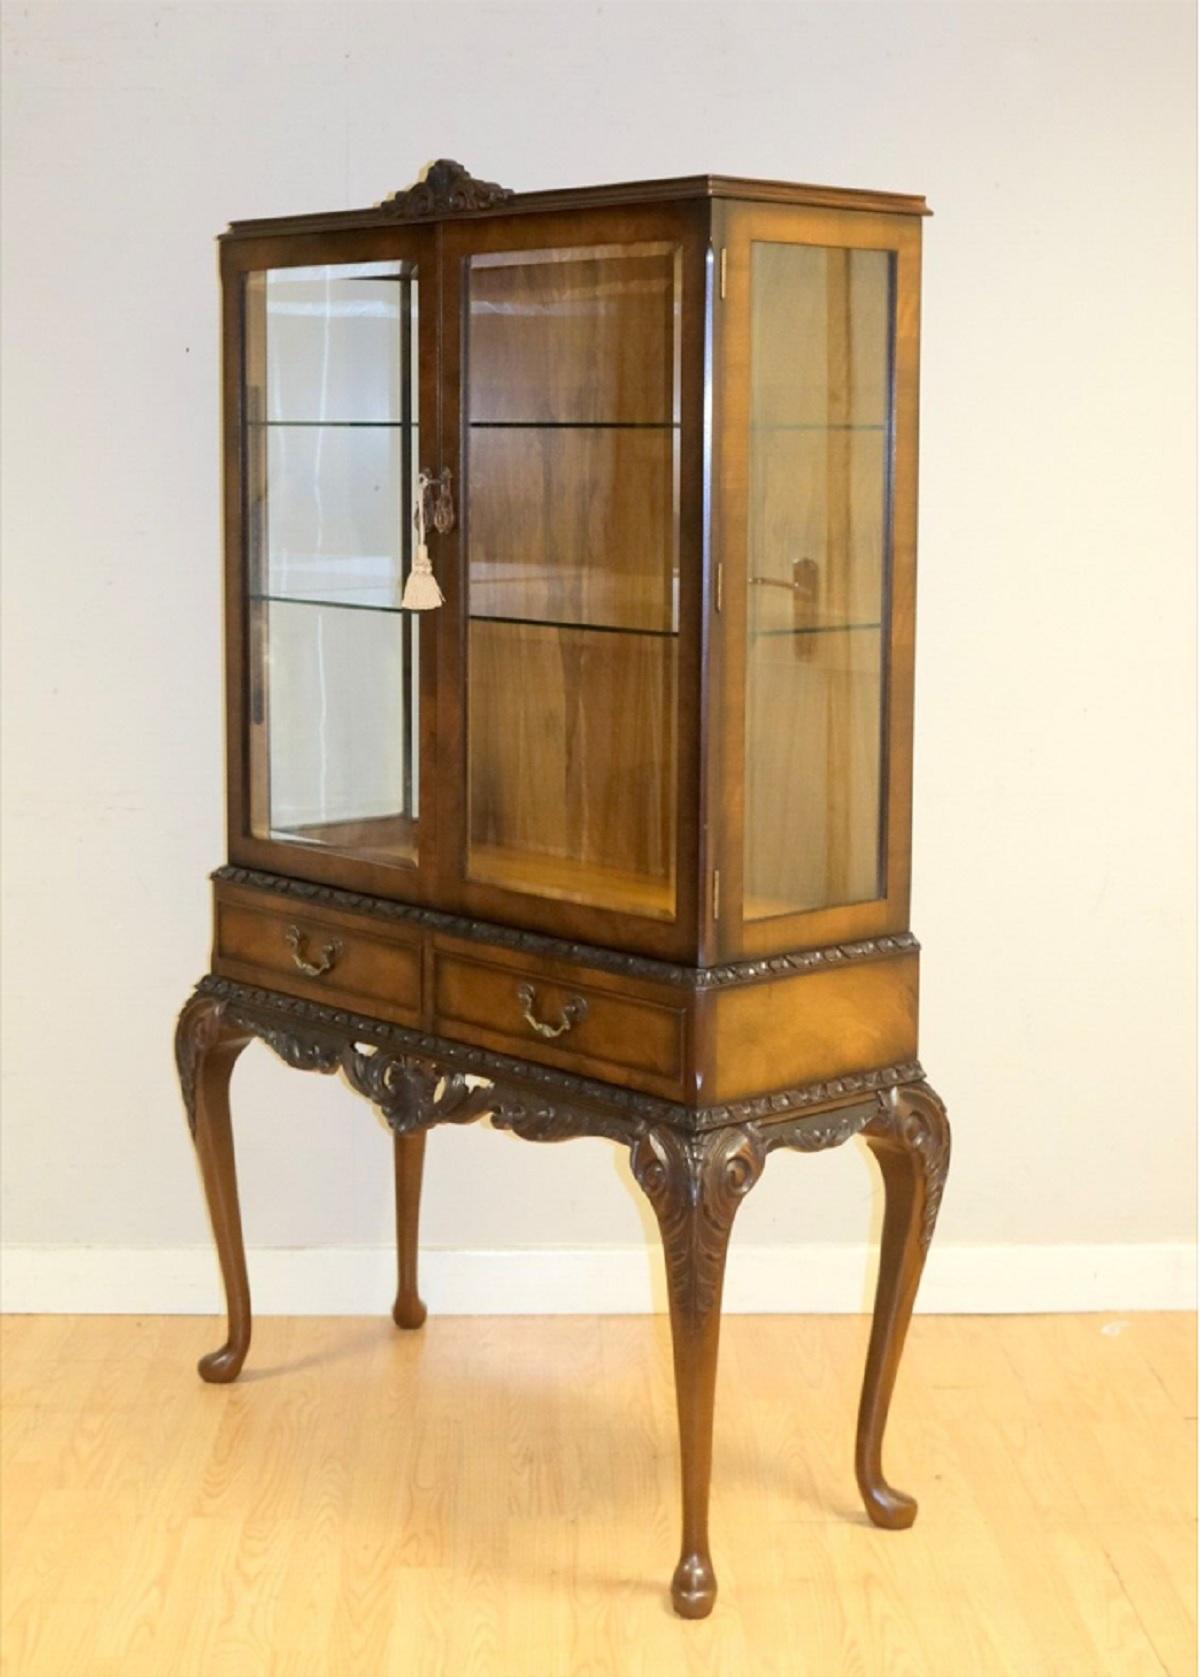 ViNTAGE DISPLAY CABINET ON QUEEN ANN Style LEGS WITH GLASS SHELVES & KEY (Queen Anne) im Angebot